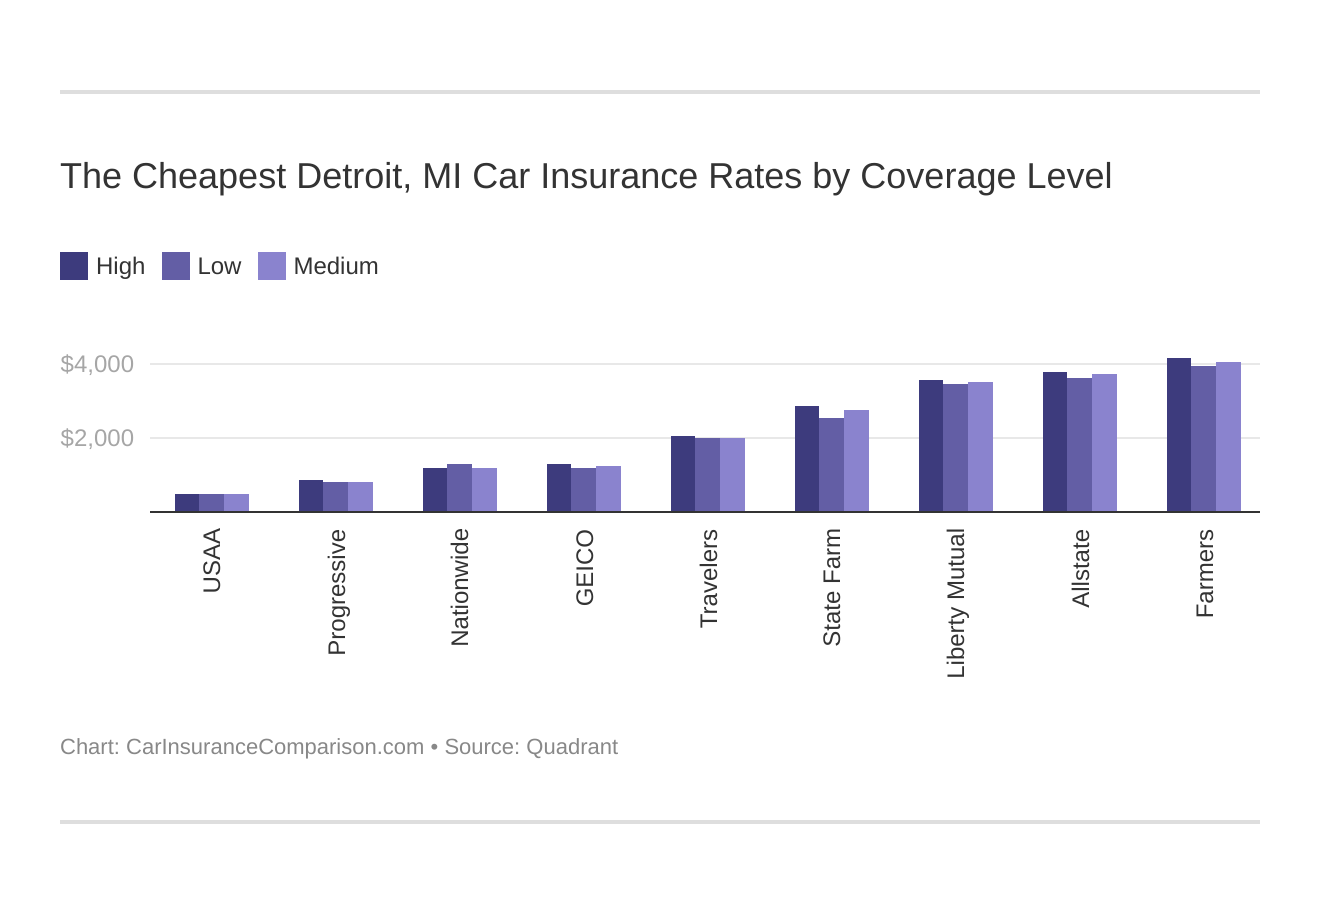 The Cheapest Detroit, MI Car Insurance Rates by Coverage Level